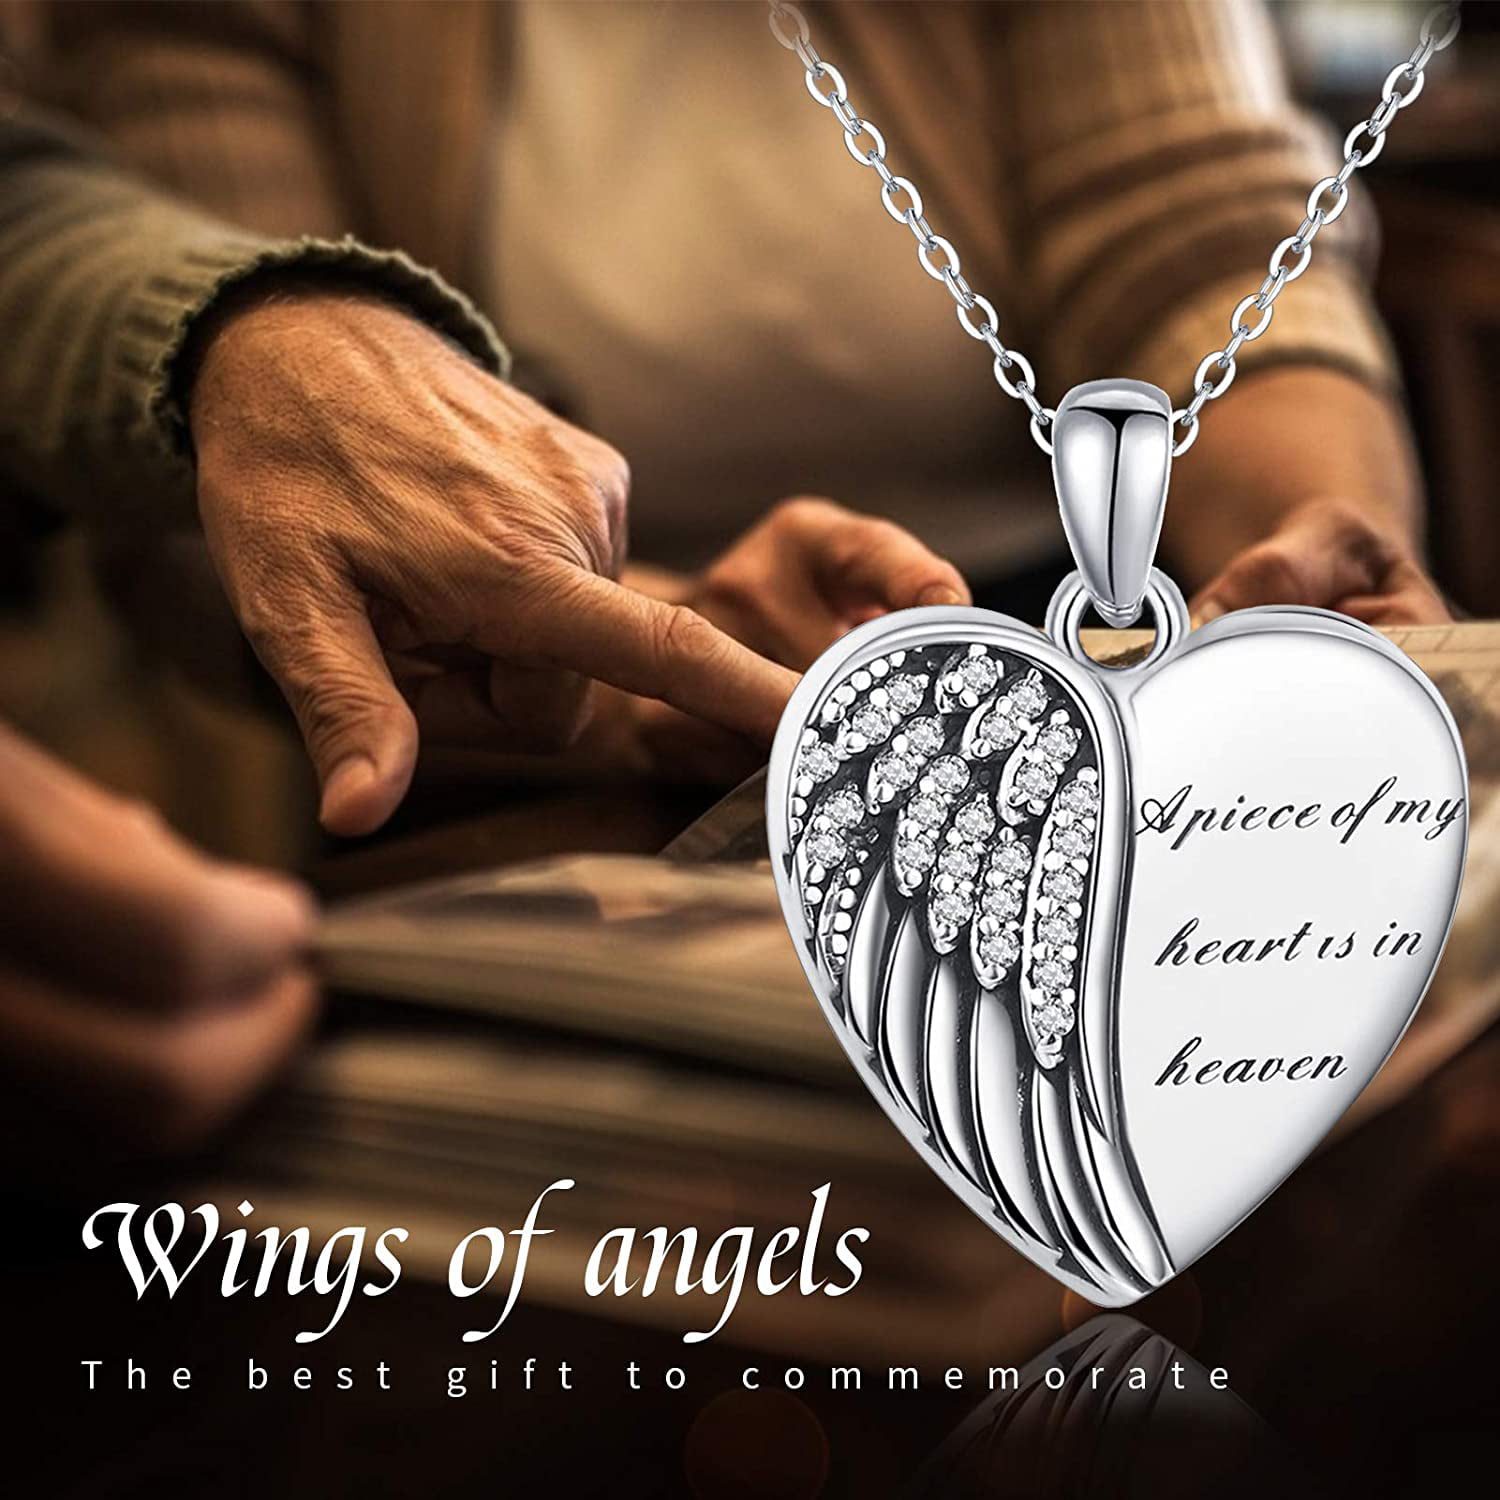 YinShan Angel Wing Locket Necklace That Hold Picture Photo 925 Sterling Silver Heart Locket Pendant for Women Girls Engraved Forever in My Heart